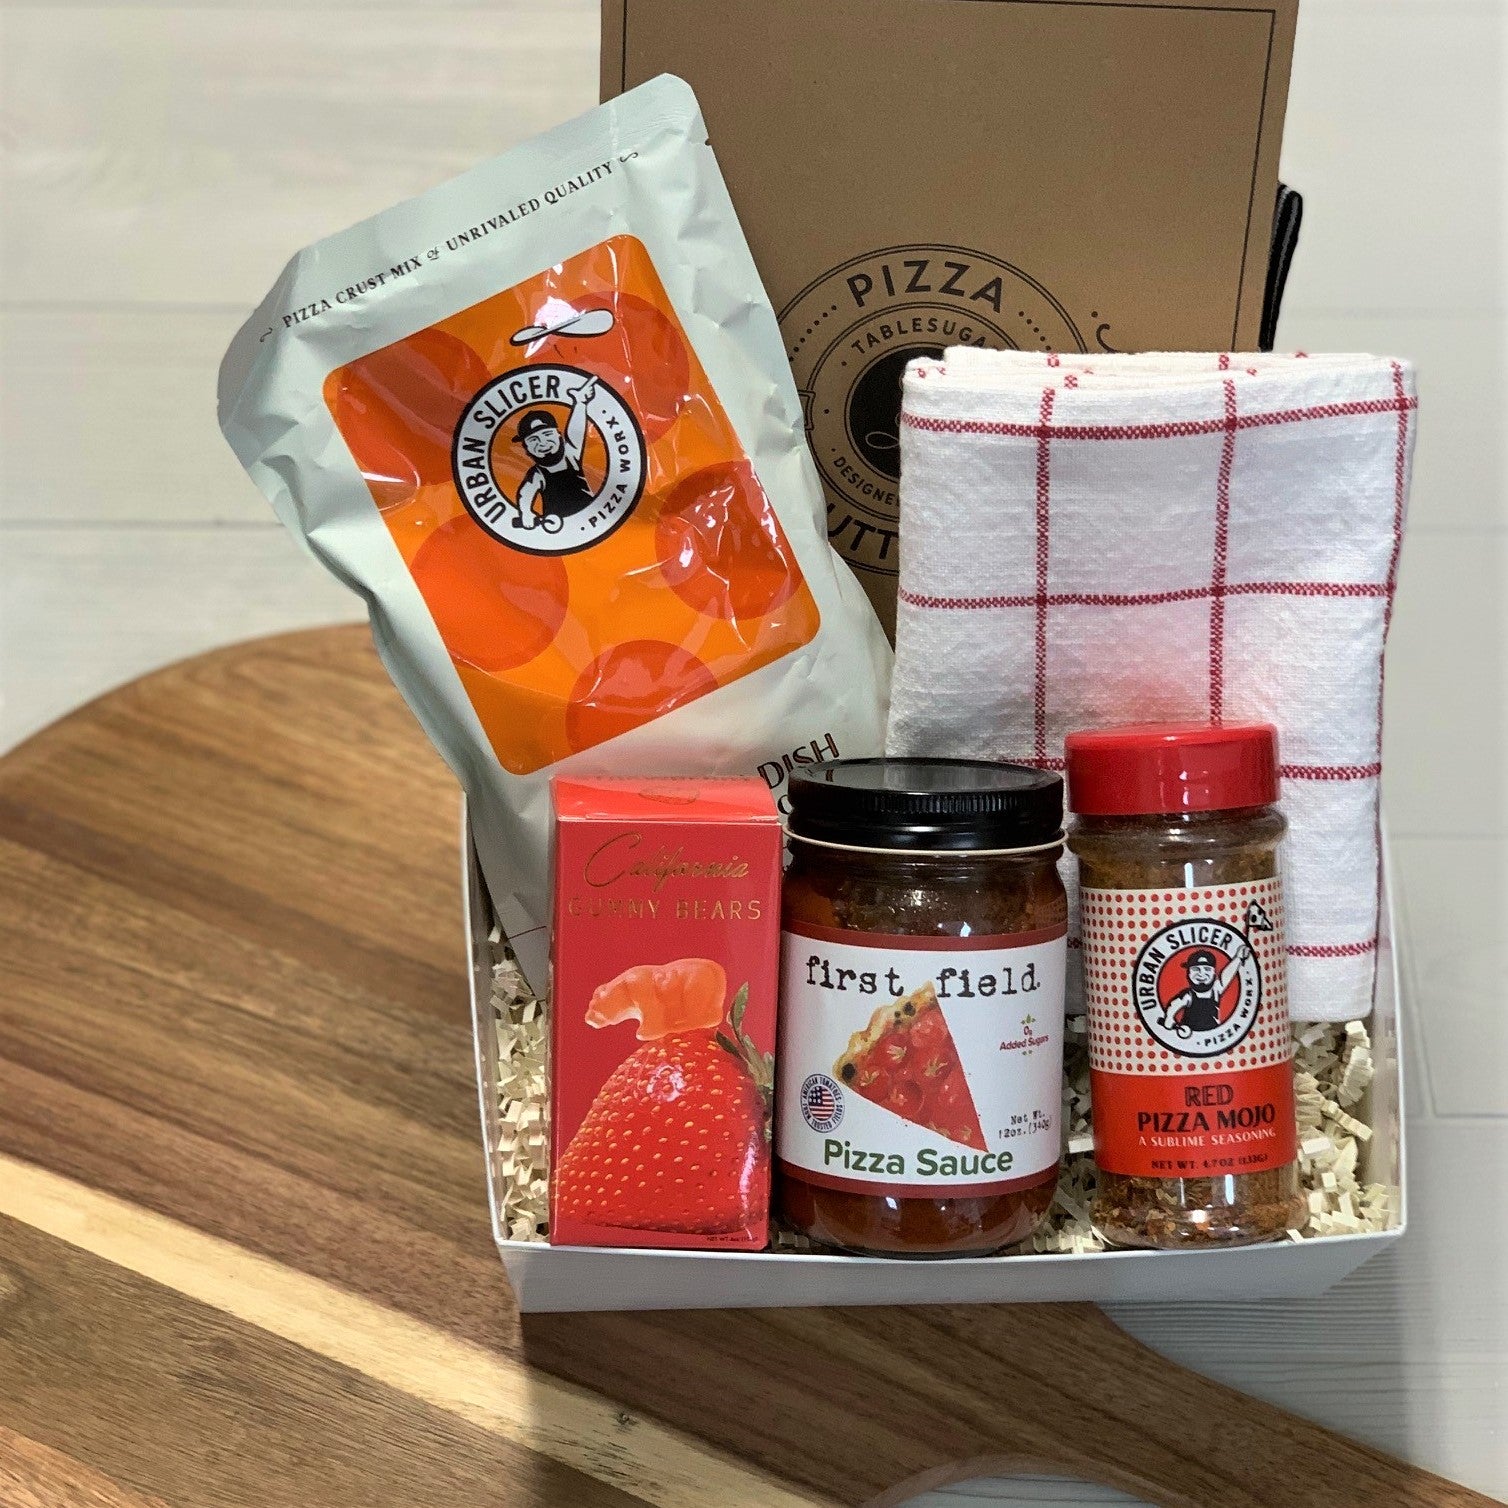 a pizza night gift basket including pizza dough, pizza sauce, pizza spice blend, a kitchen towel, gummy bears, a pizza cutter, and a pizza peel.